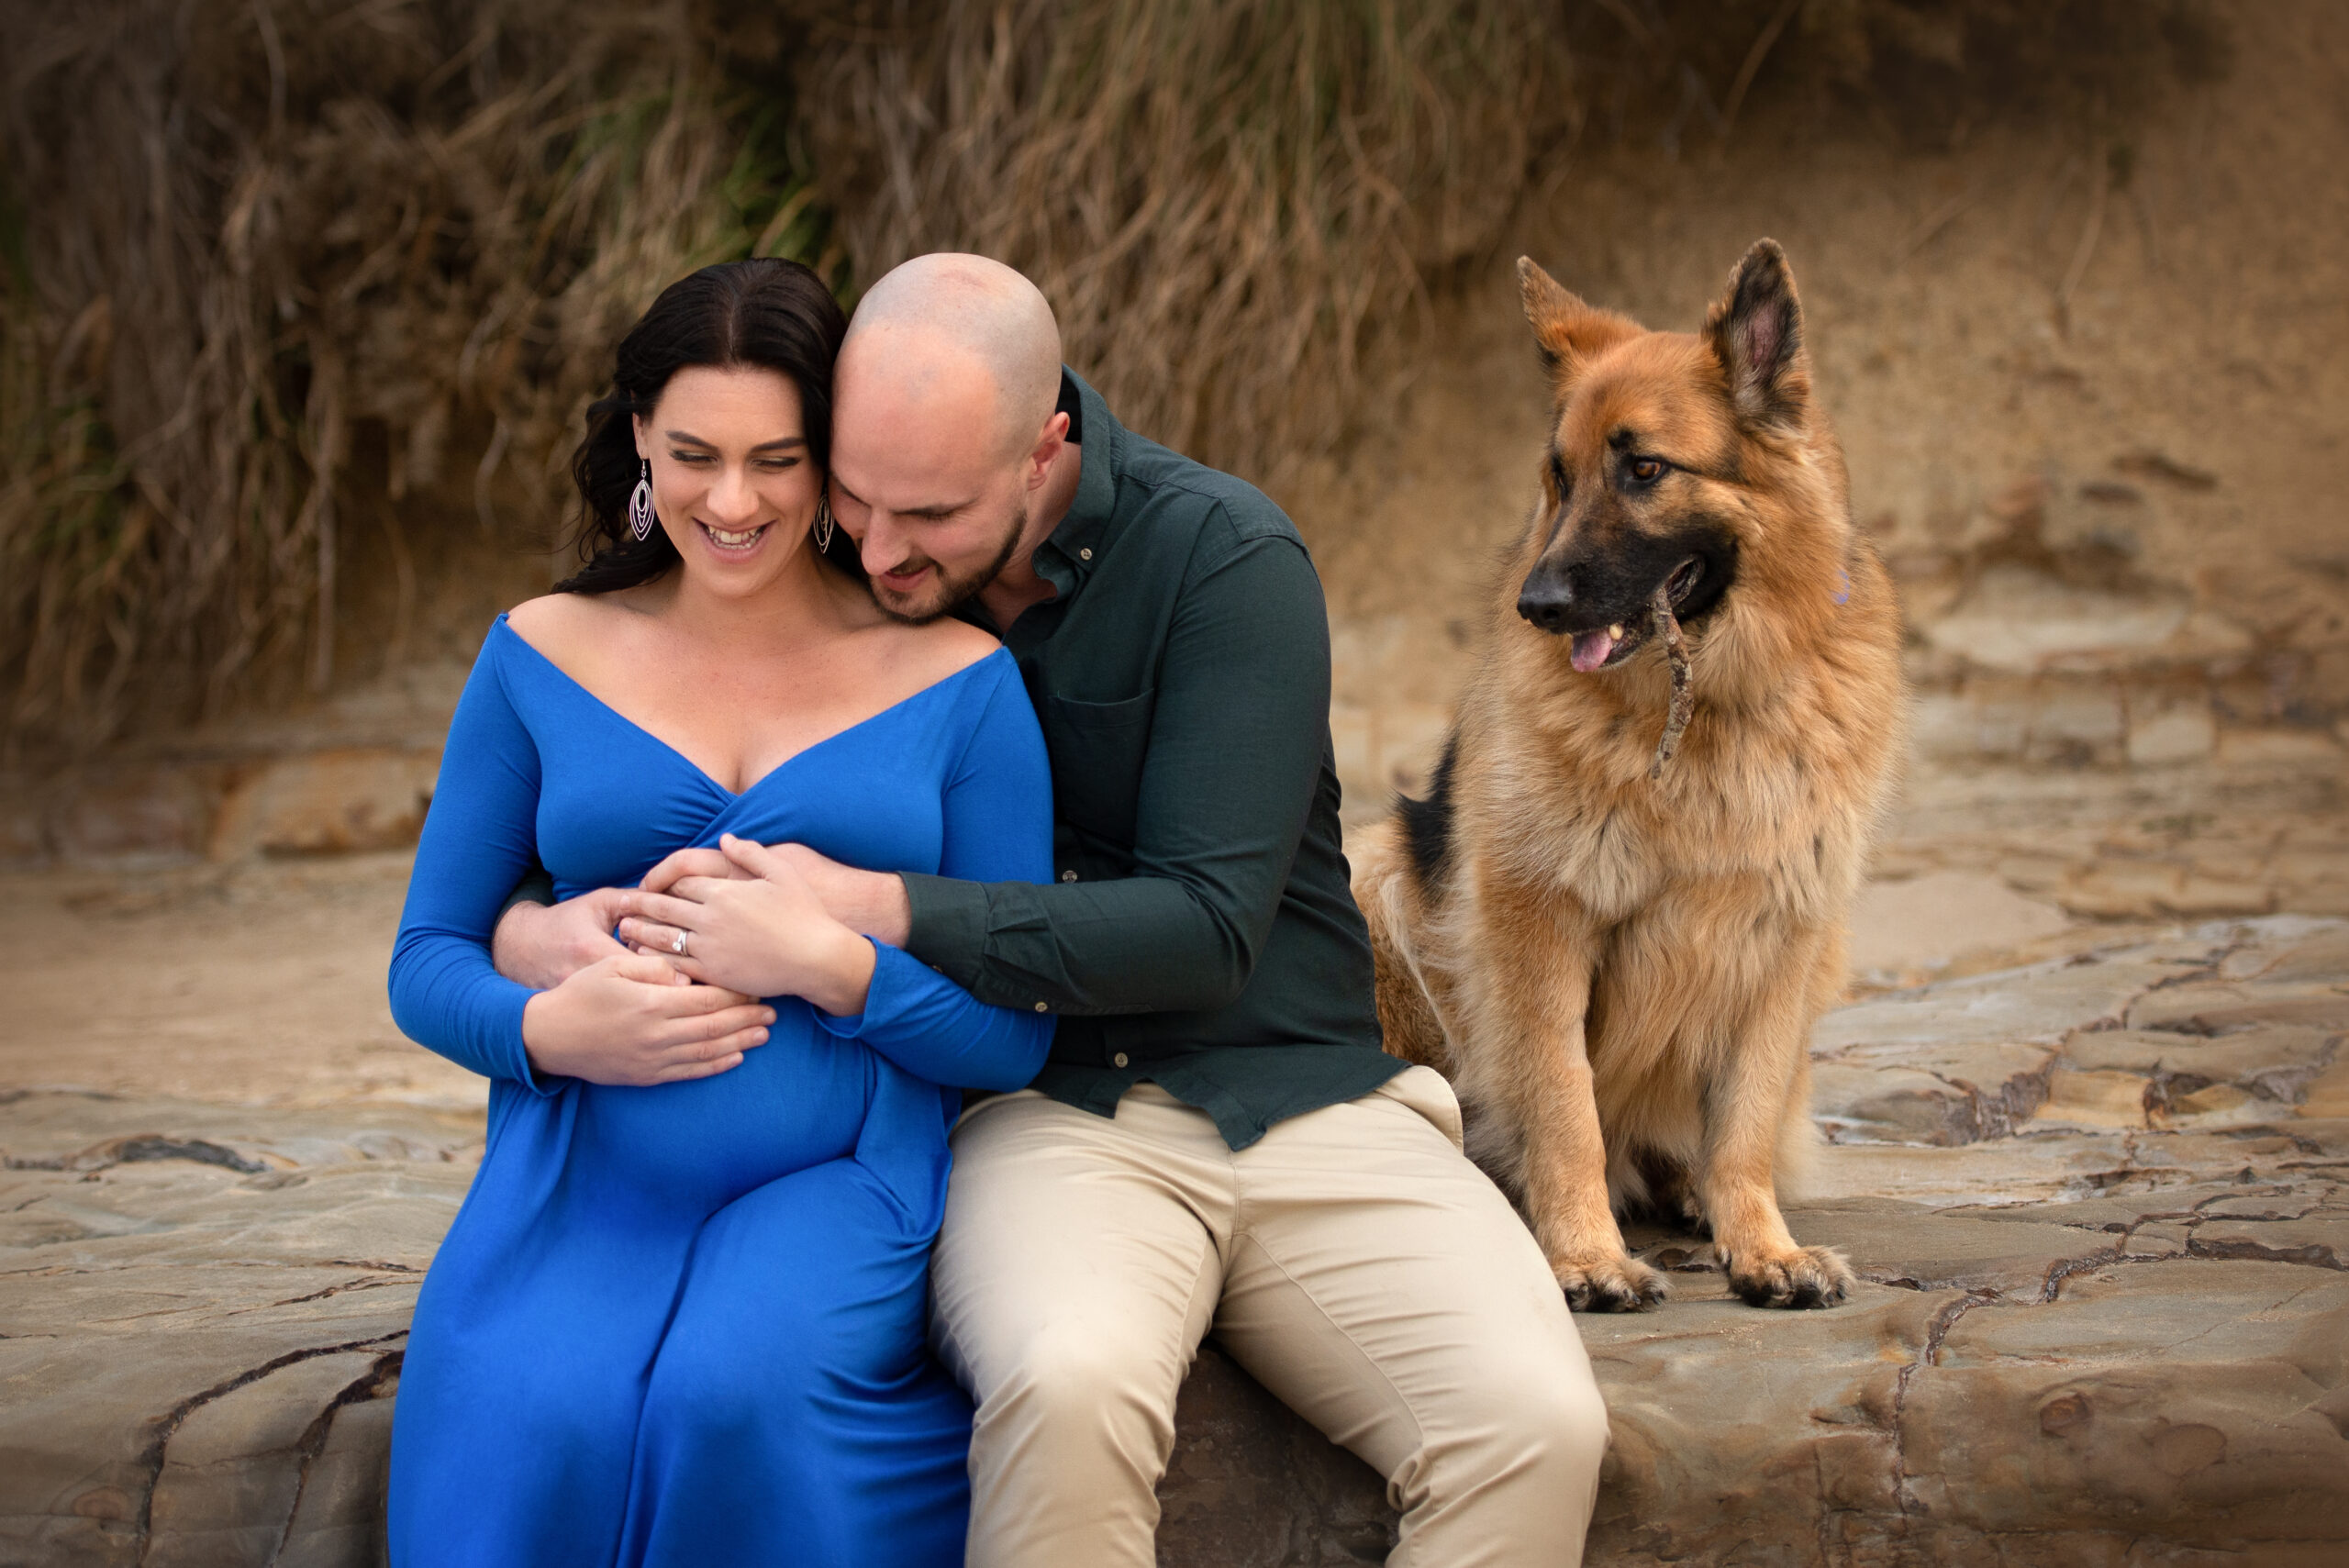 Pregnancy coouple and dog by pregnancy photographer siobhan kelly